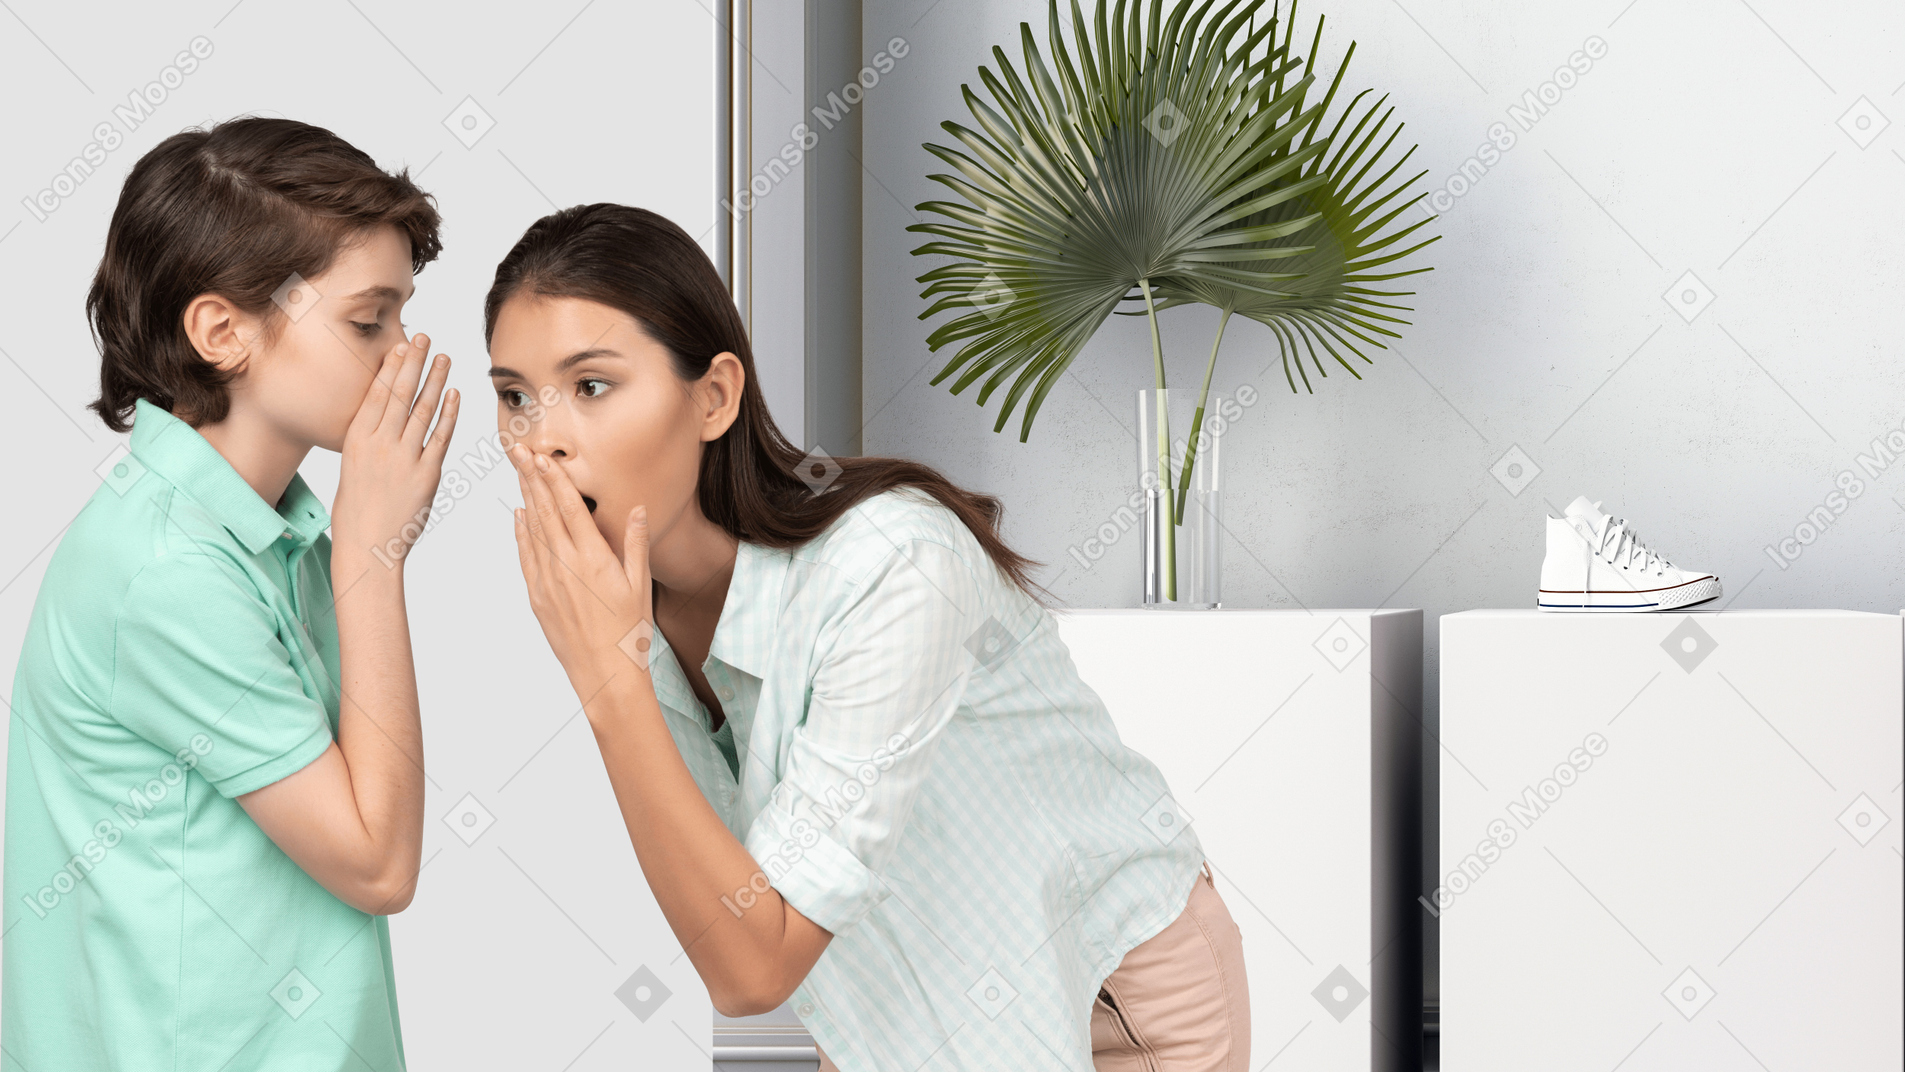 A boy whispering something to a woman